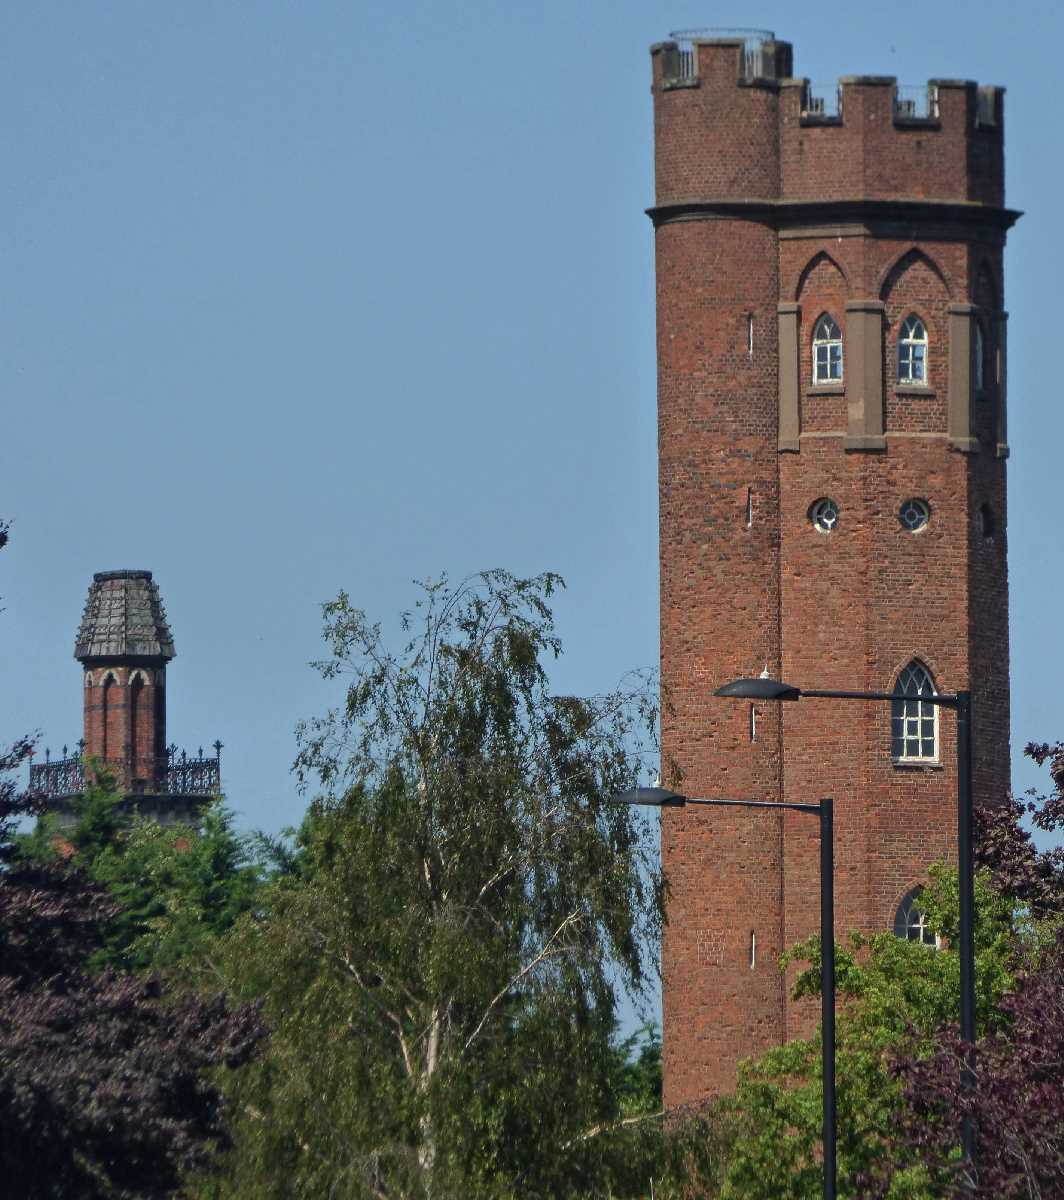 J.R.R. Tolkien`s The Two Towers: Perrott`s Folly and the Edgbaston Waterworks Tower